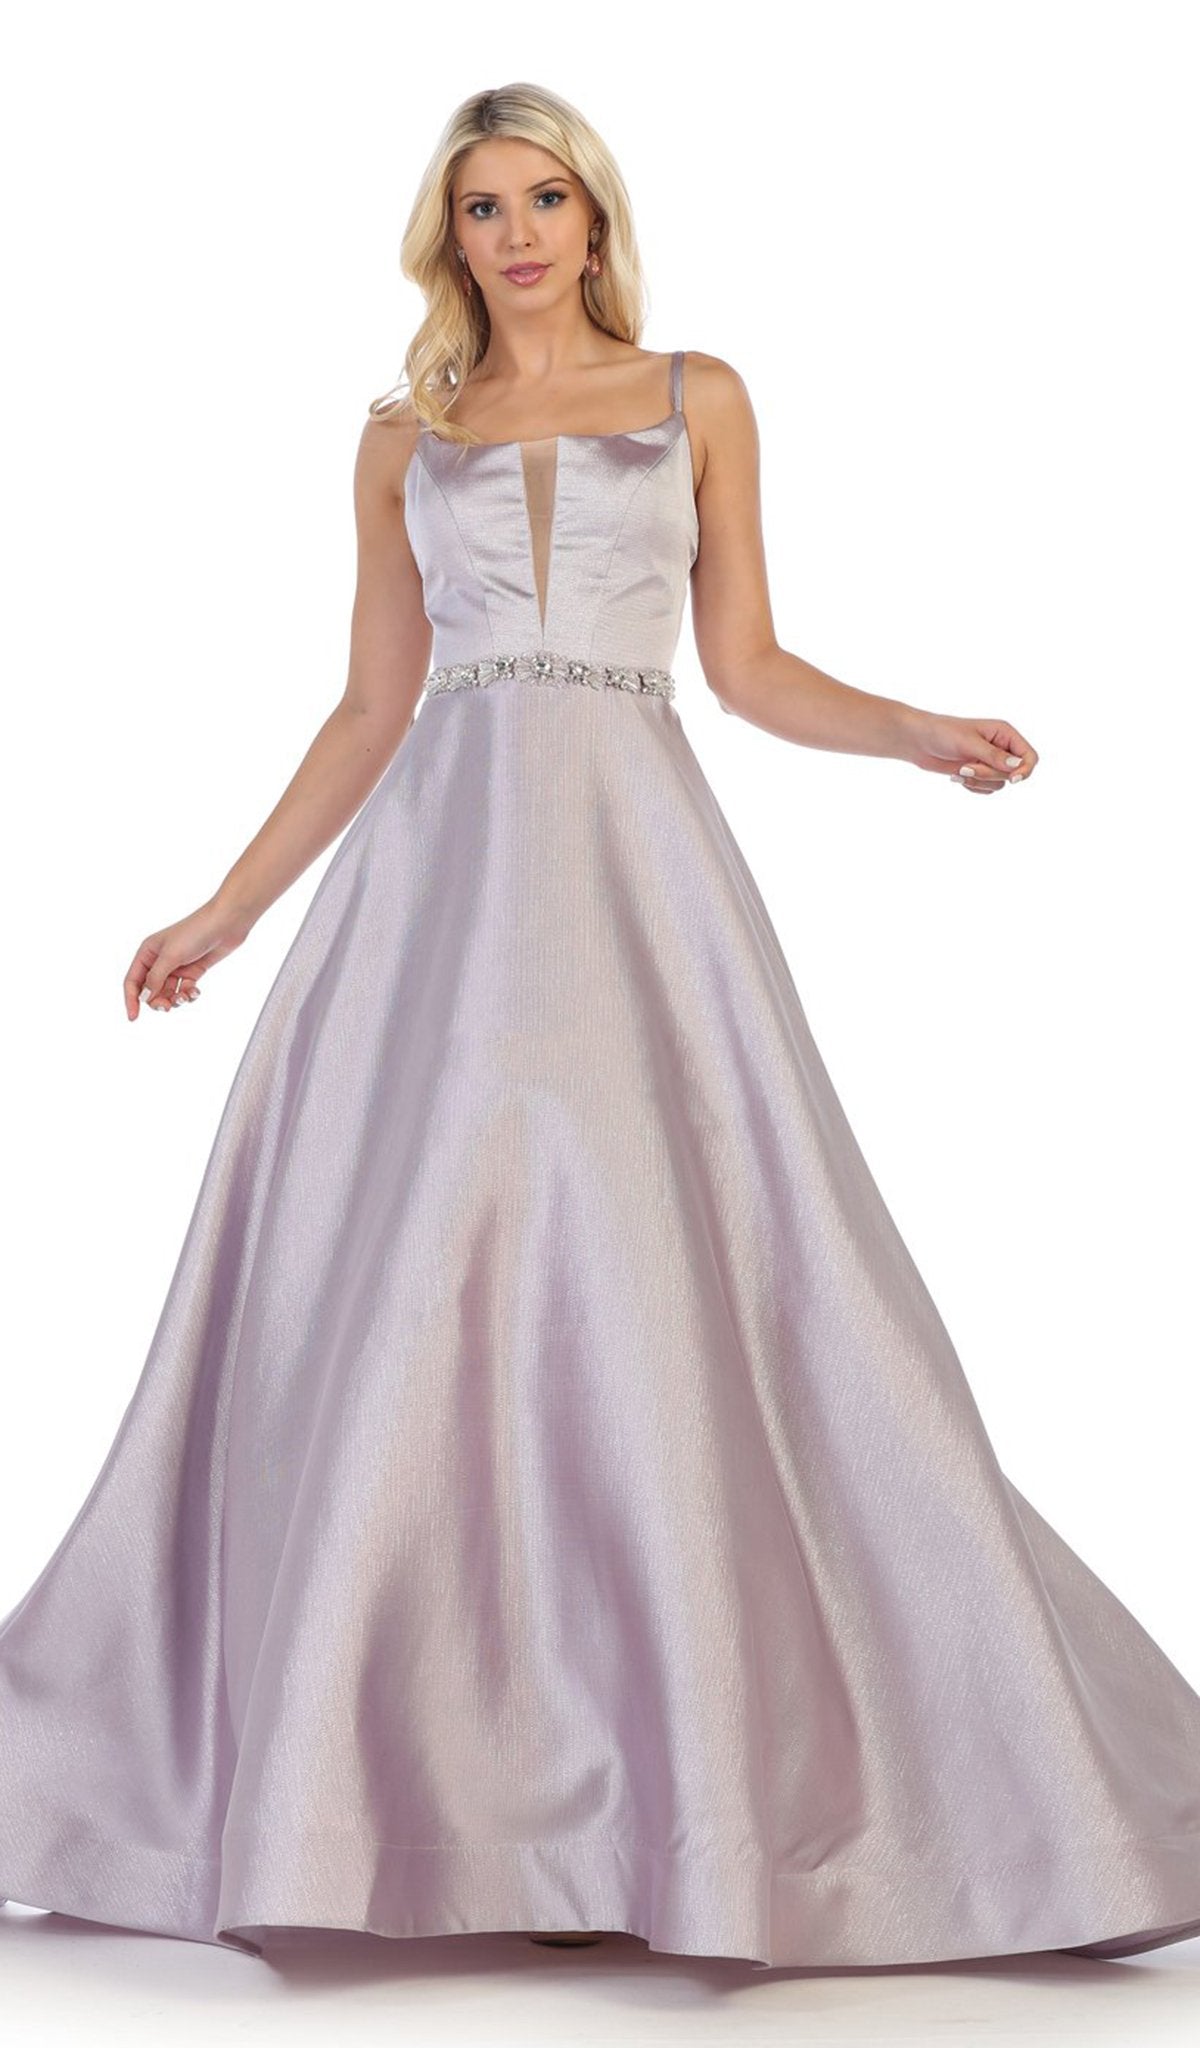 May Queen - RQ7734 Embellished Scoop Neck Ballgown With Strappy Back In Pink